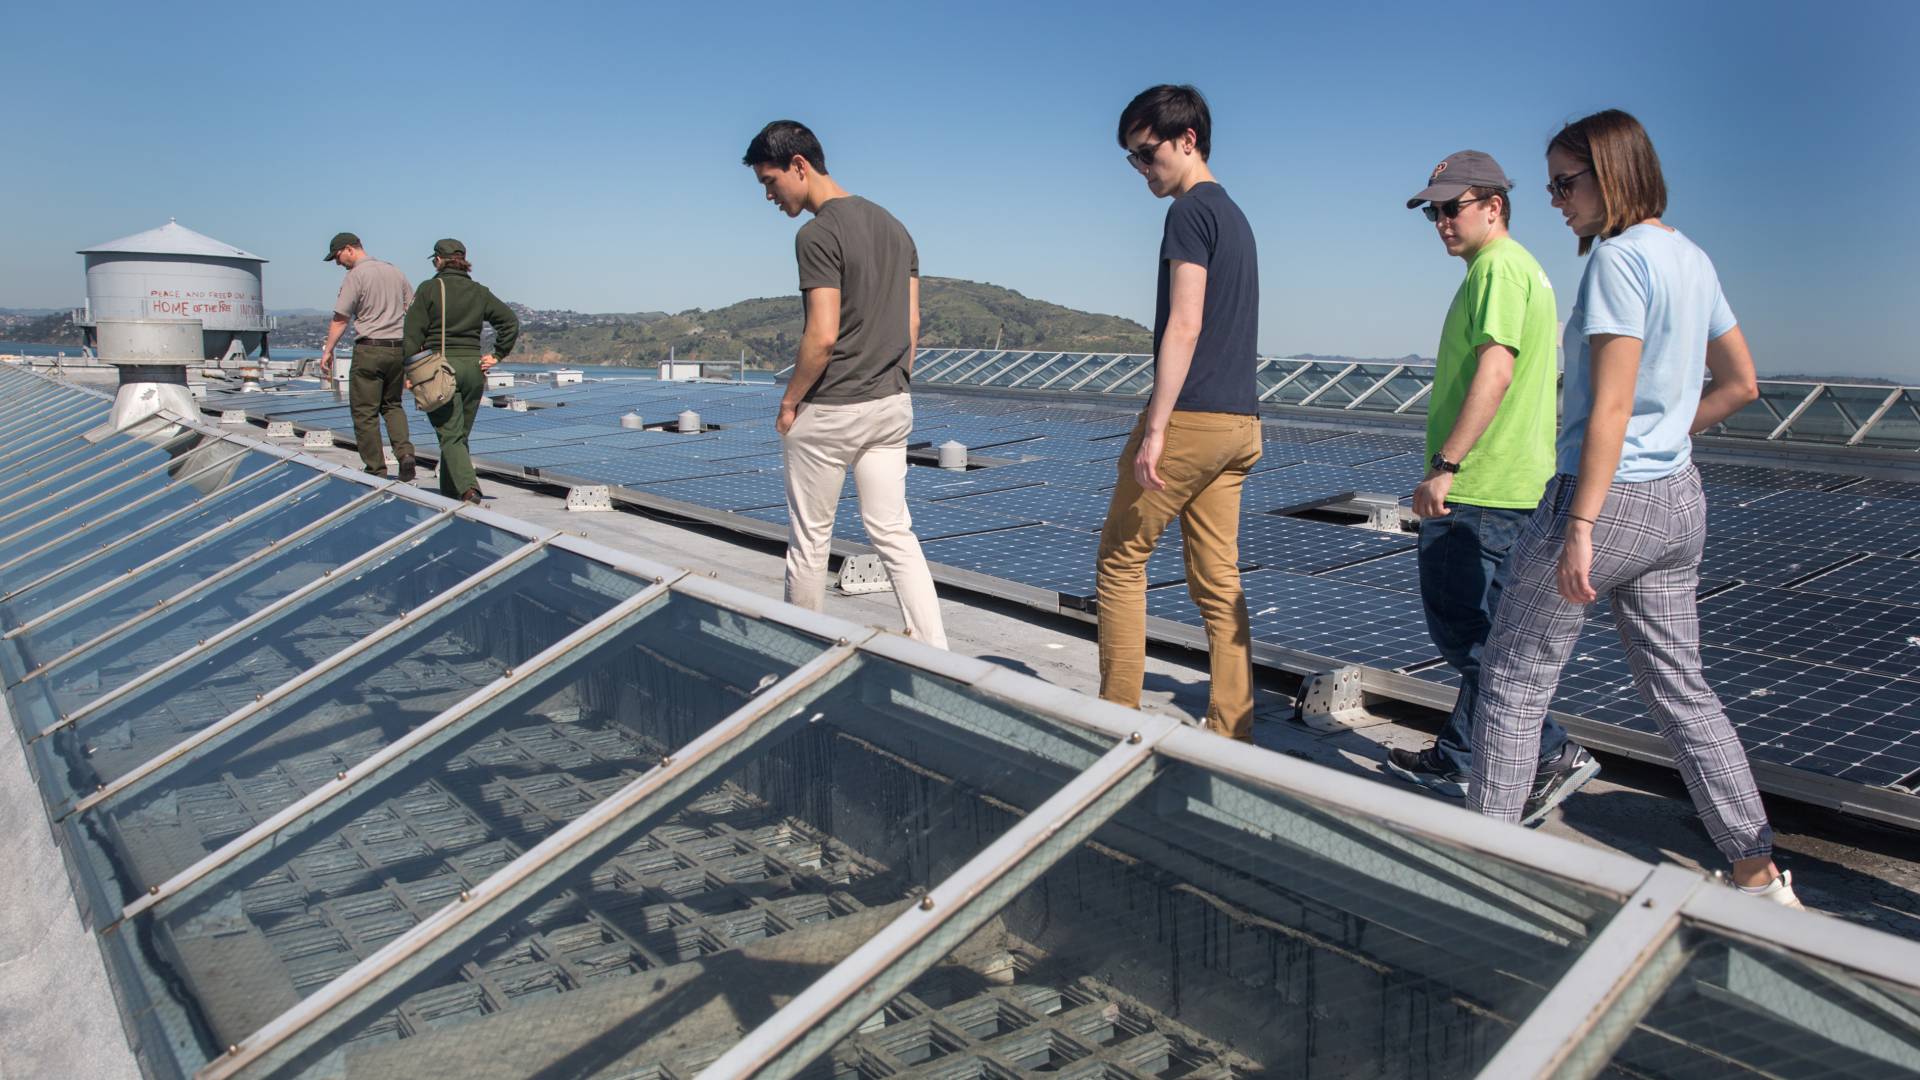 Students walking on rooftop with solar panels in the background